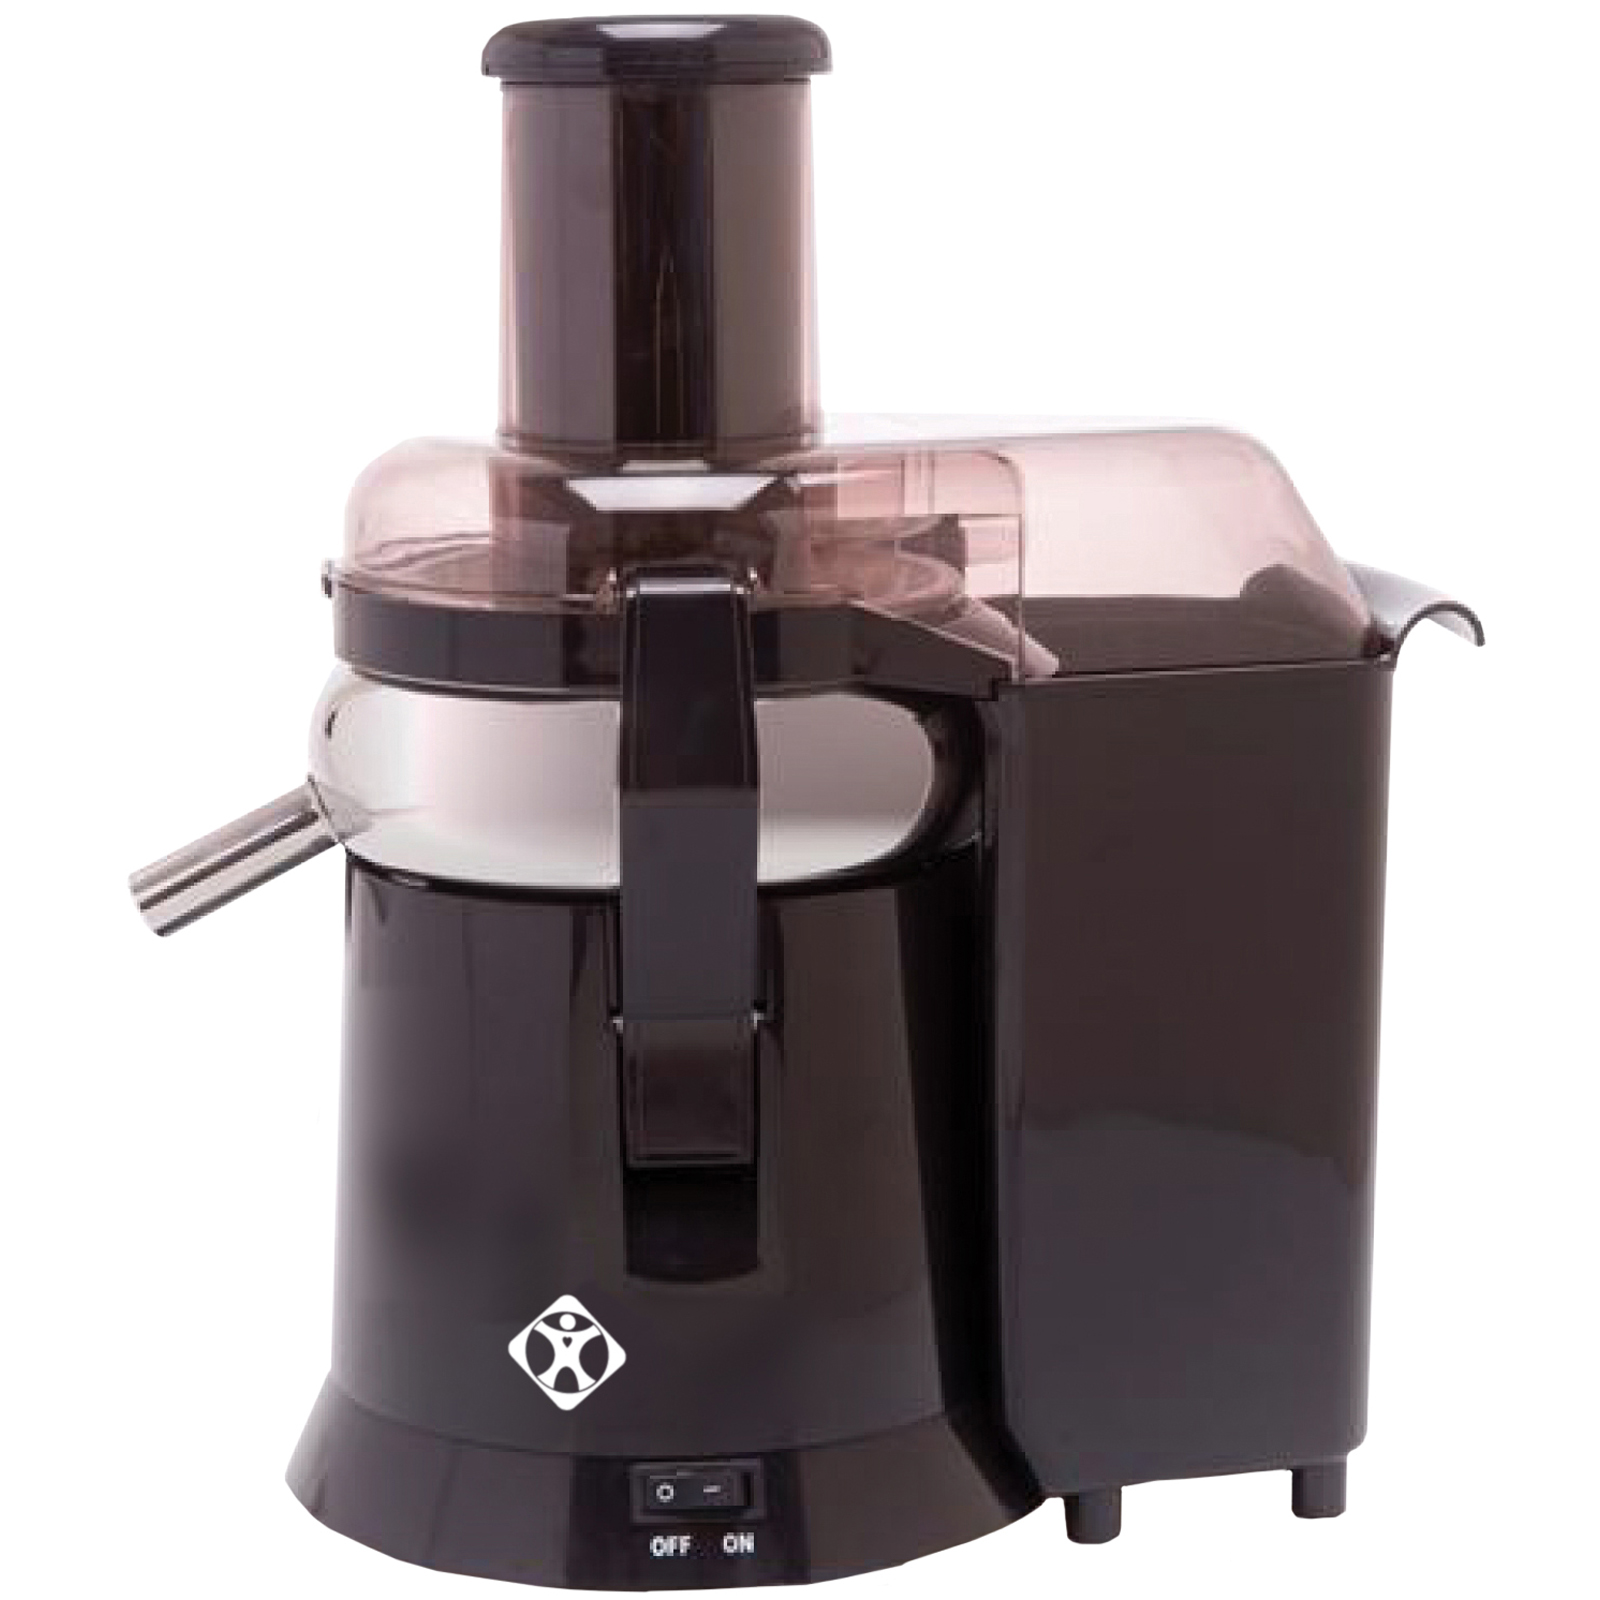 L'EQUIP 306605 480 Watts XL Pulp Ejection Juice Extractor -Black